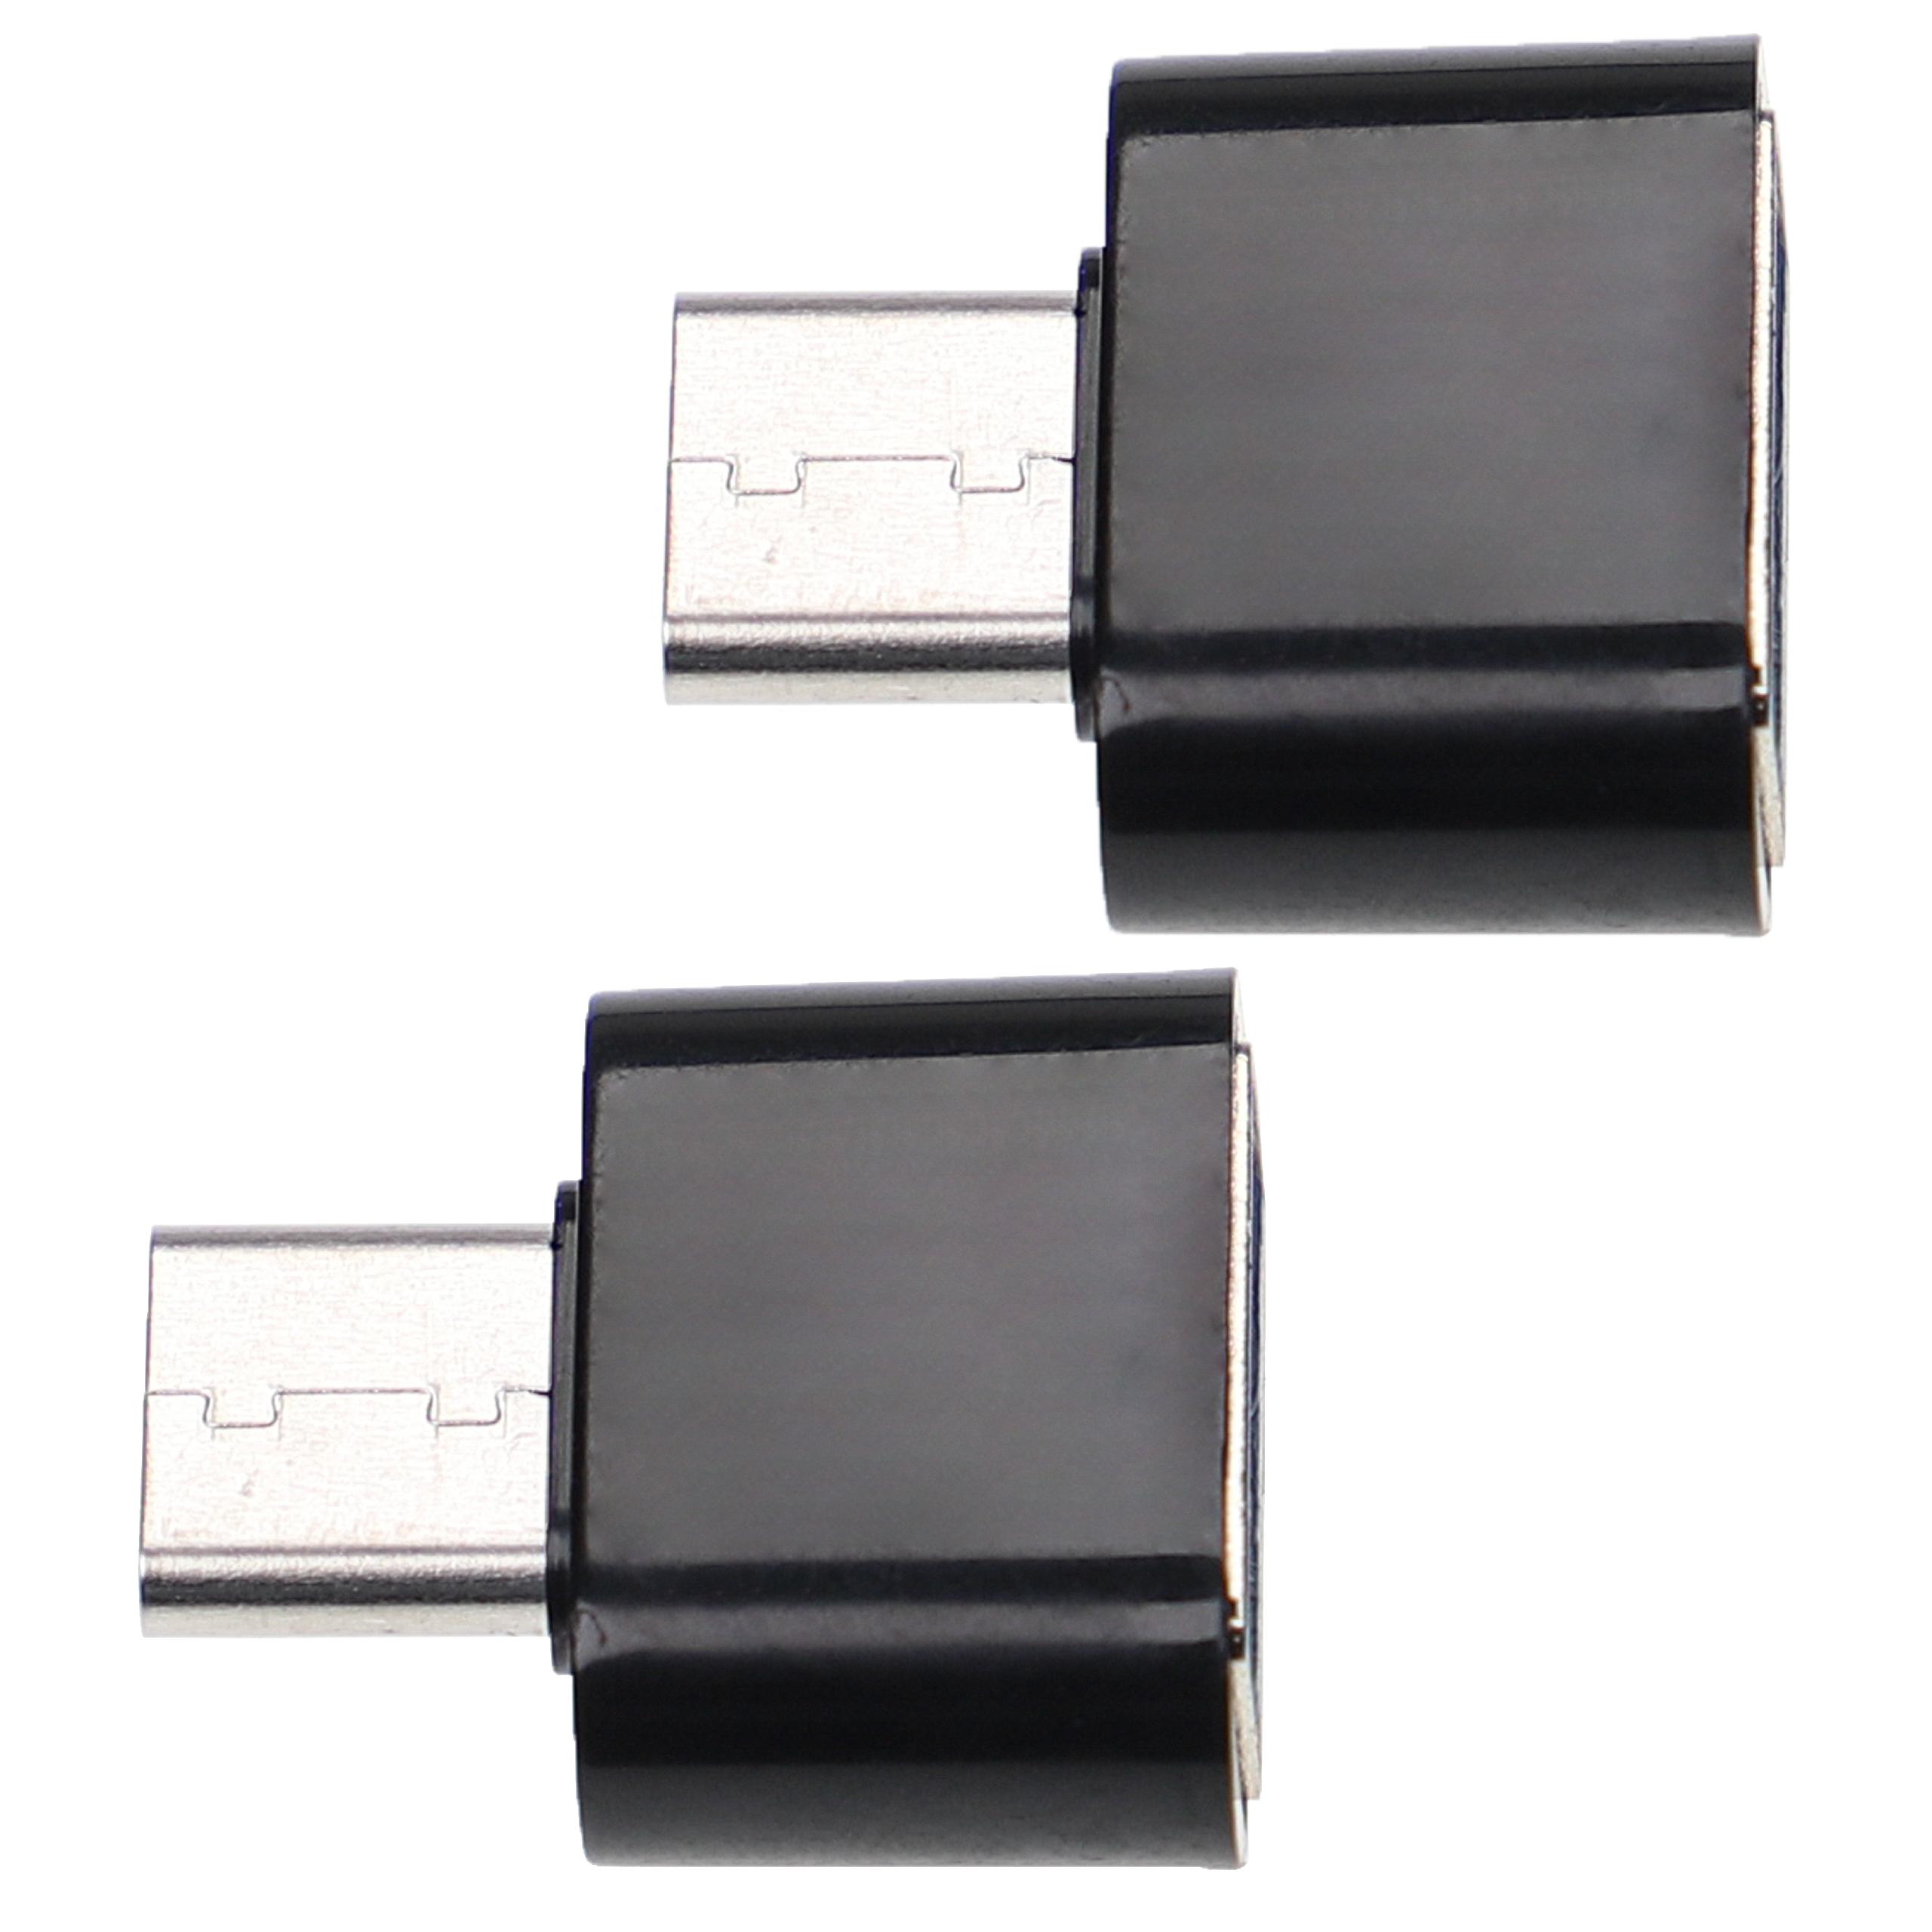 2x Adapter USB Type C (m) to USB 3.0 (f) suitable for Smartphone, Tablet, Notebook - USB Adapter Black